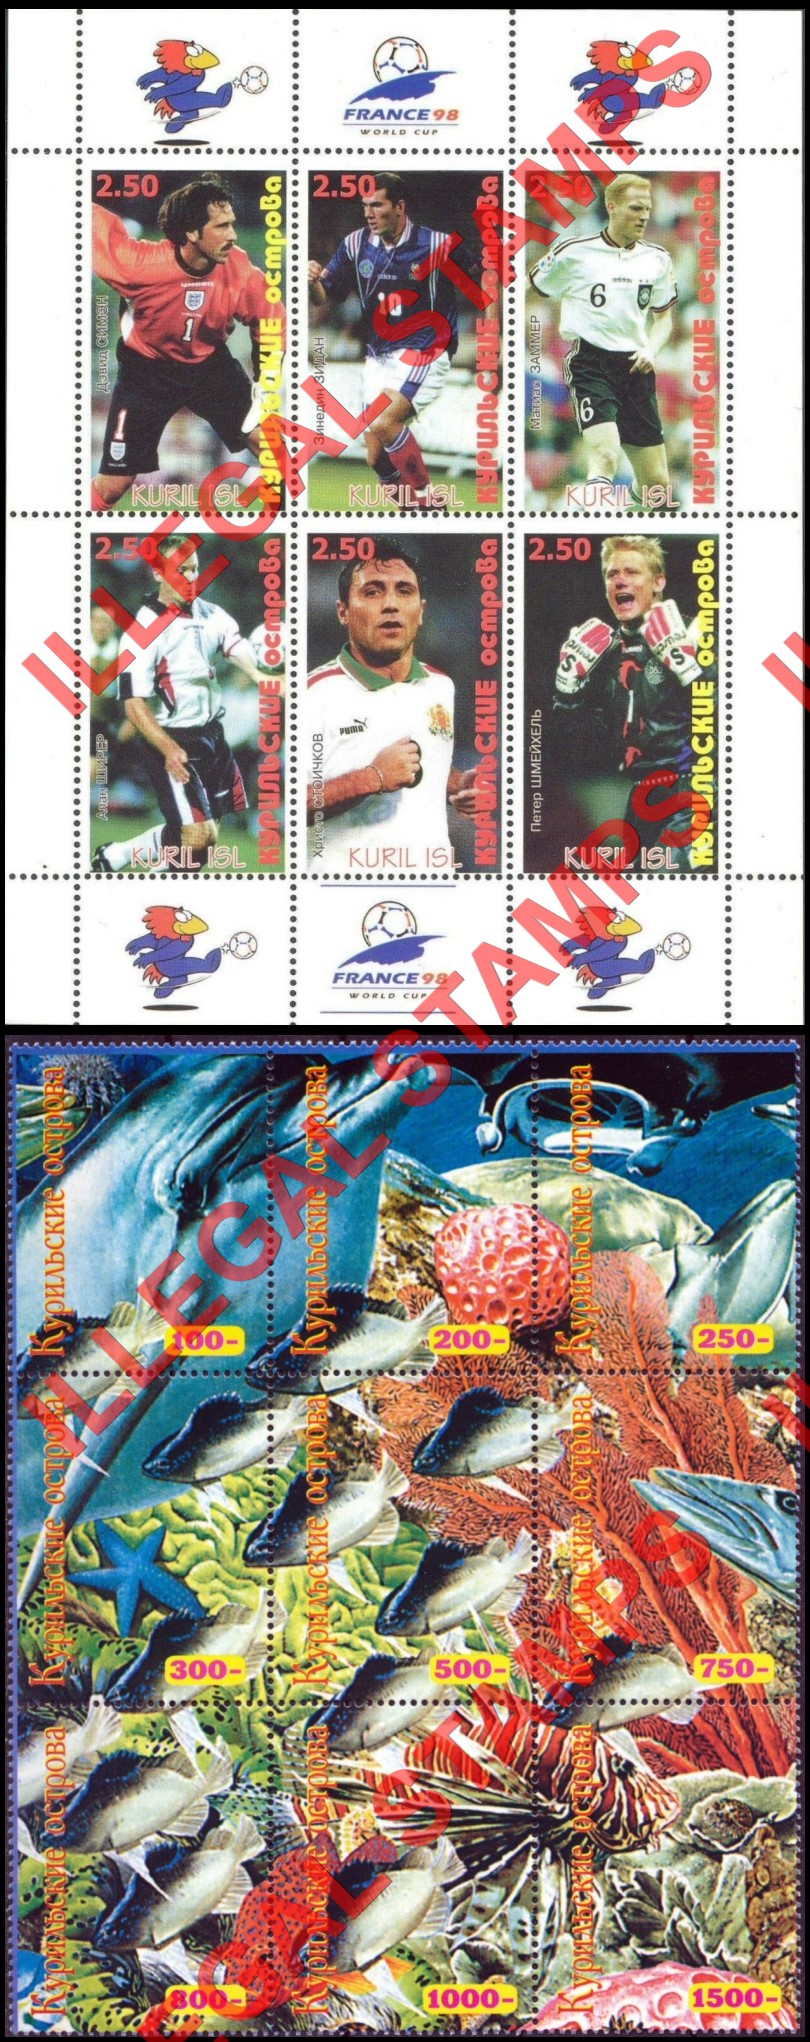 Kuril Islands 1998 Counterfeit Illegal Stamps